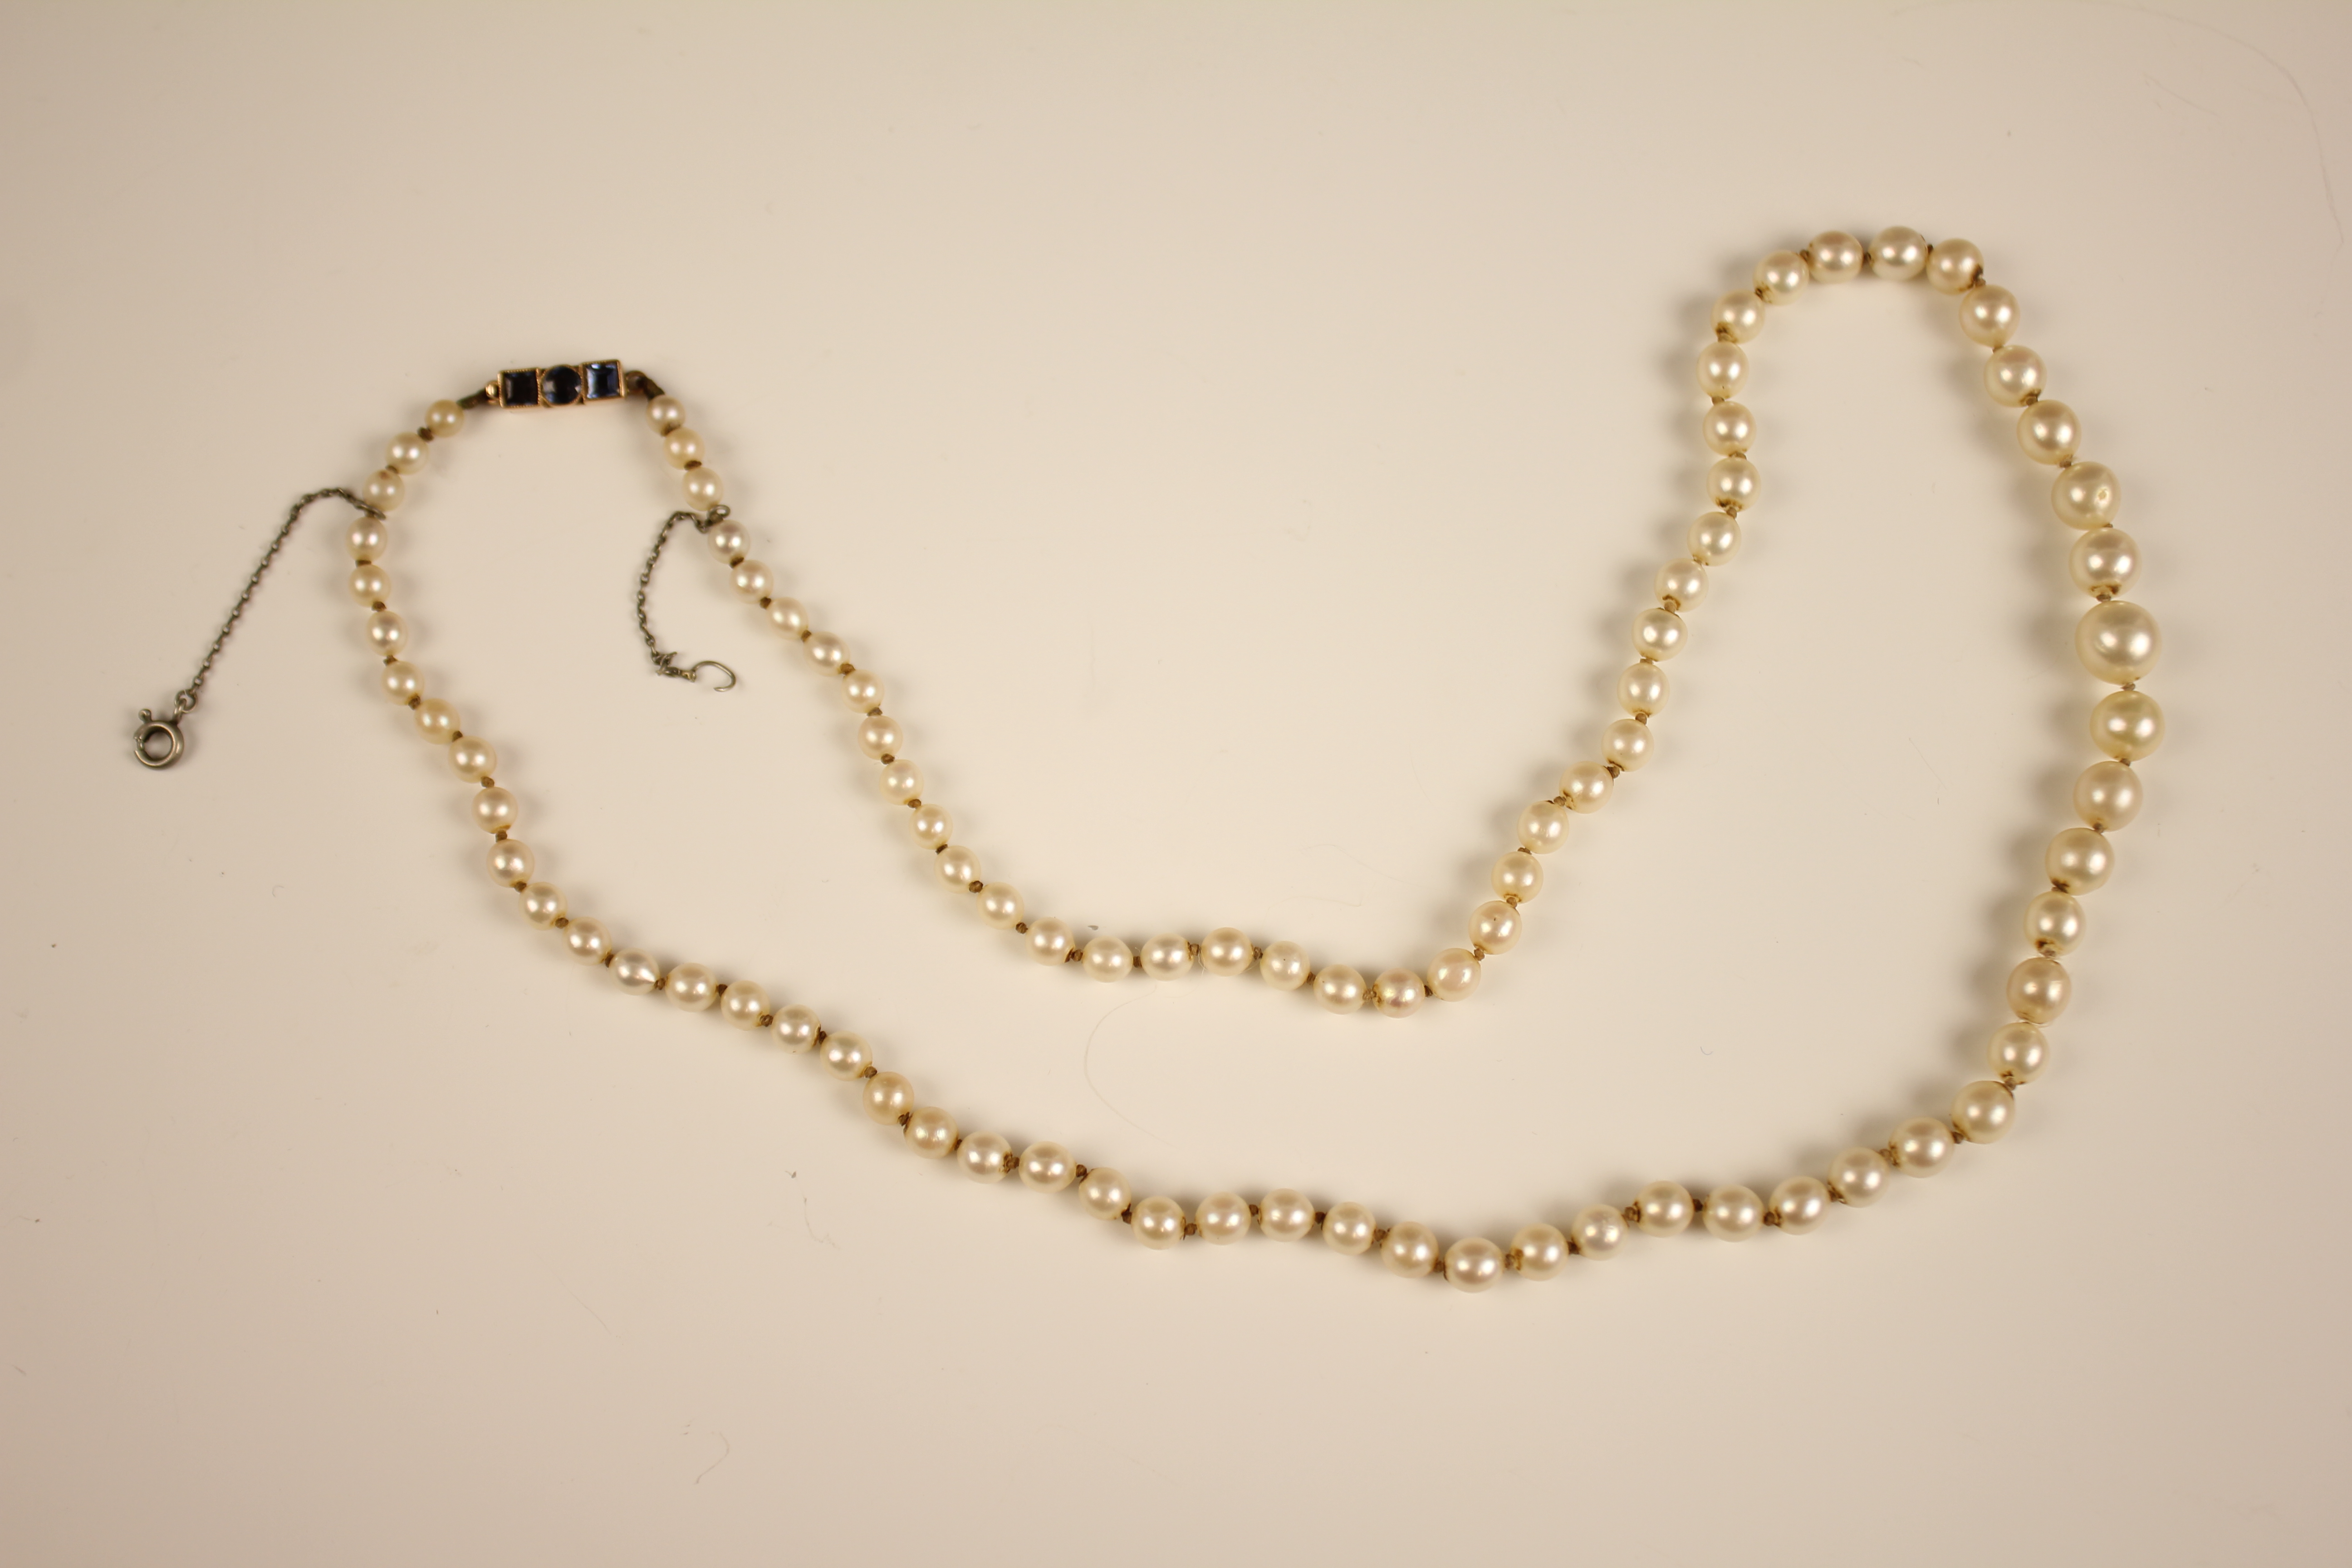 An early 20th century cultured pearl necklace, designed as a single row of round cultured pearls, - Image 2 of 12